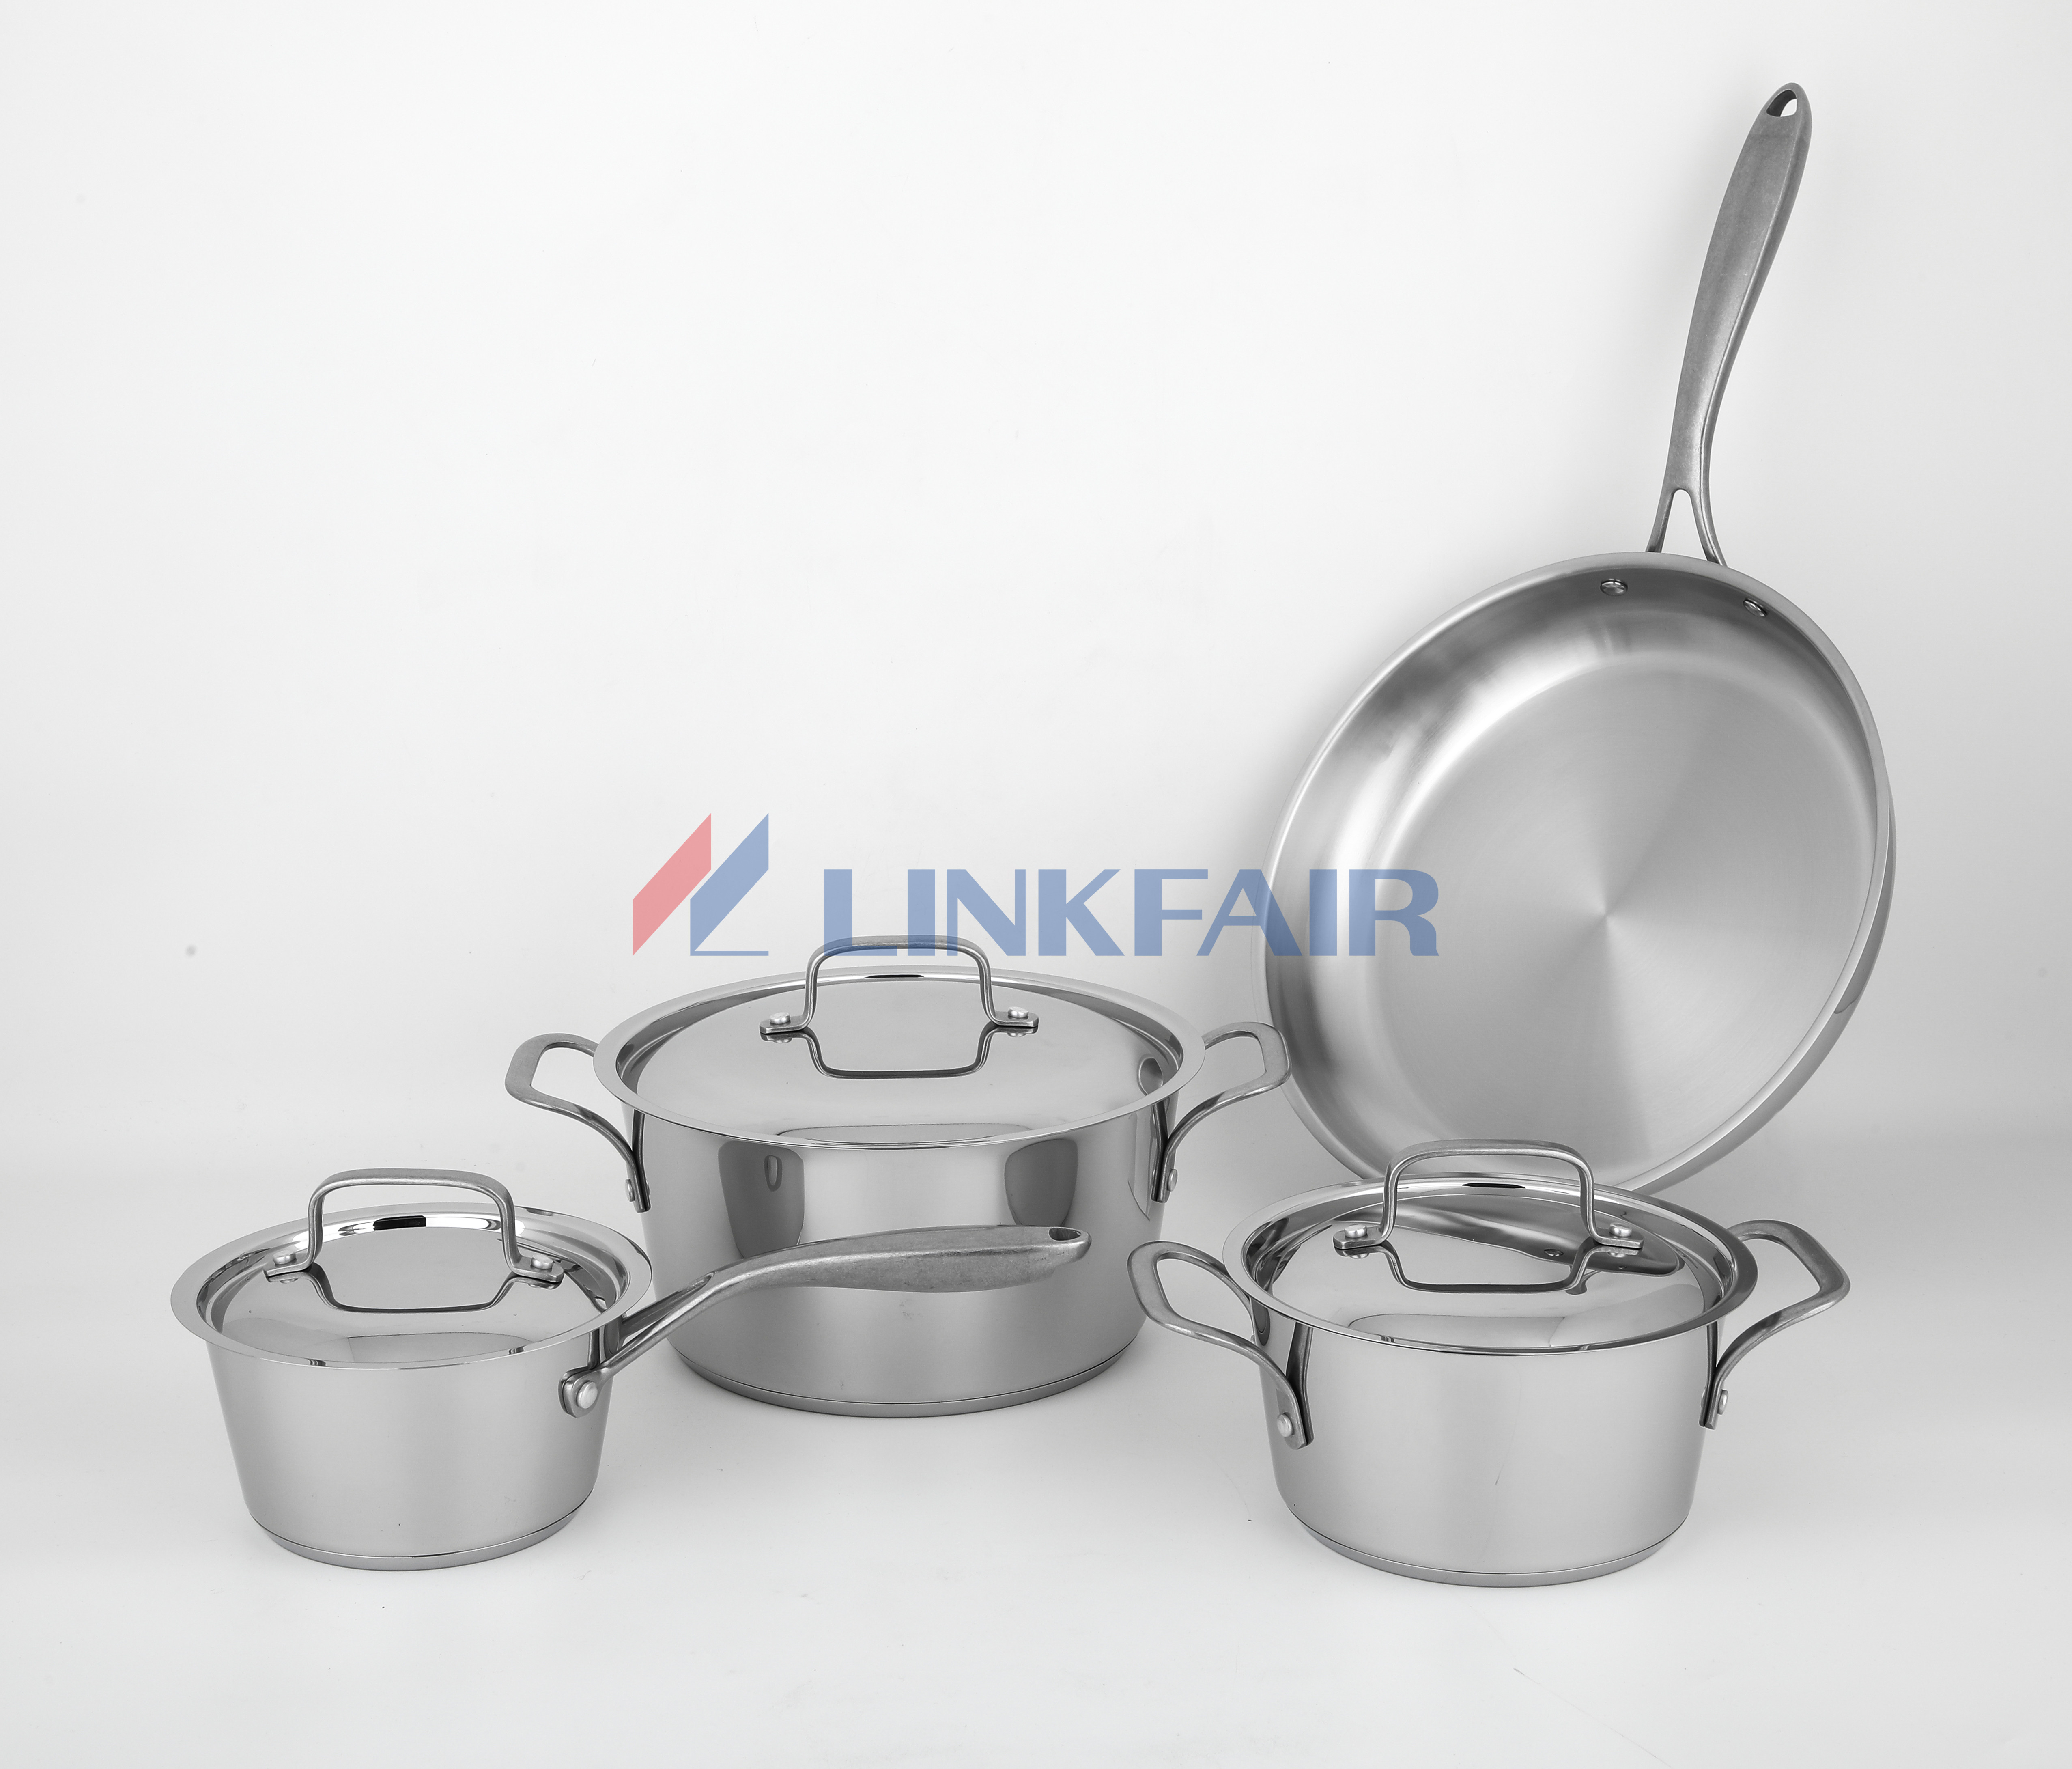 7-Piece Stainless Steel Cookware Set of Conical Shape